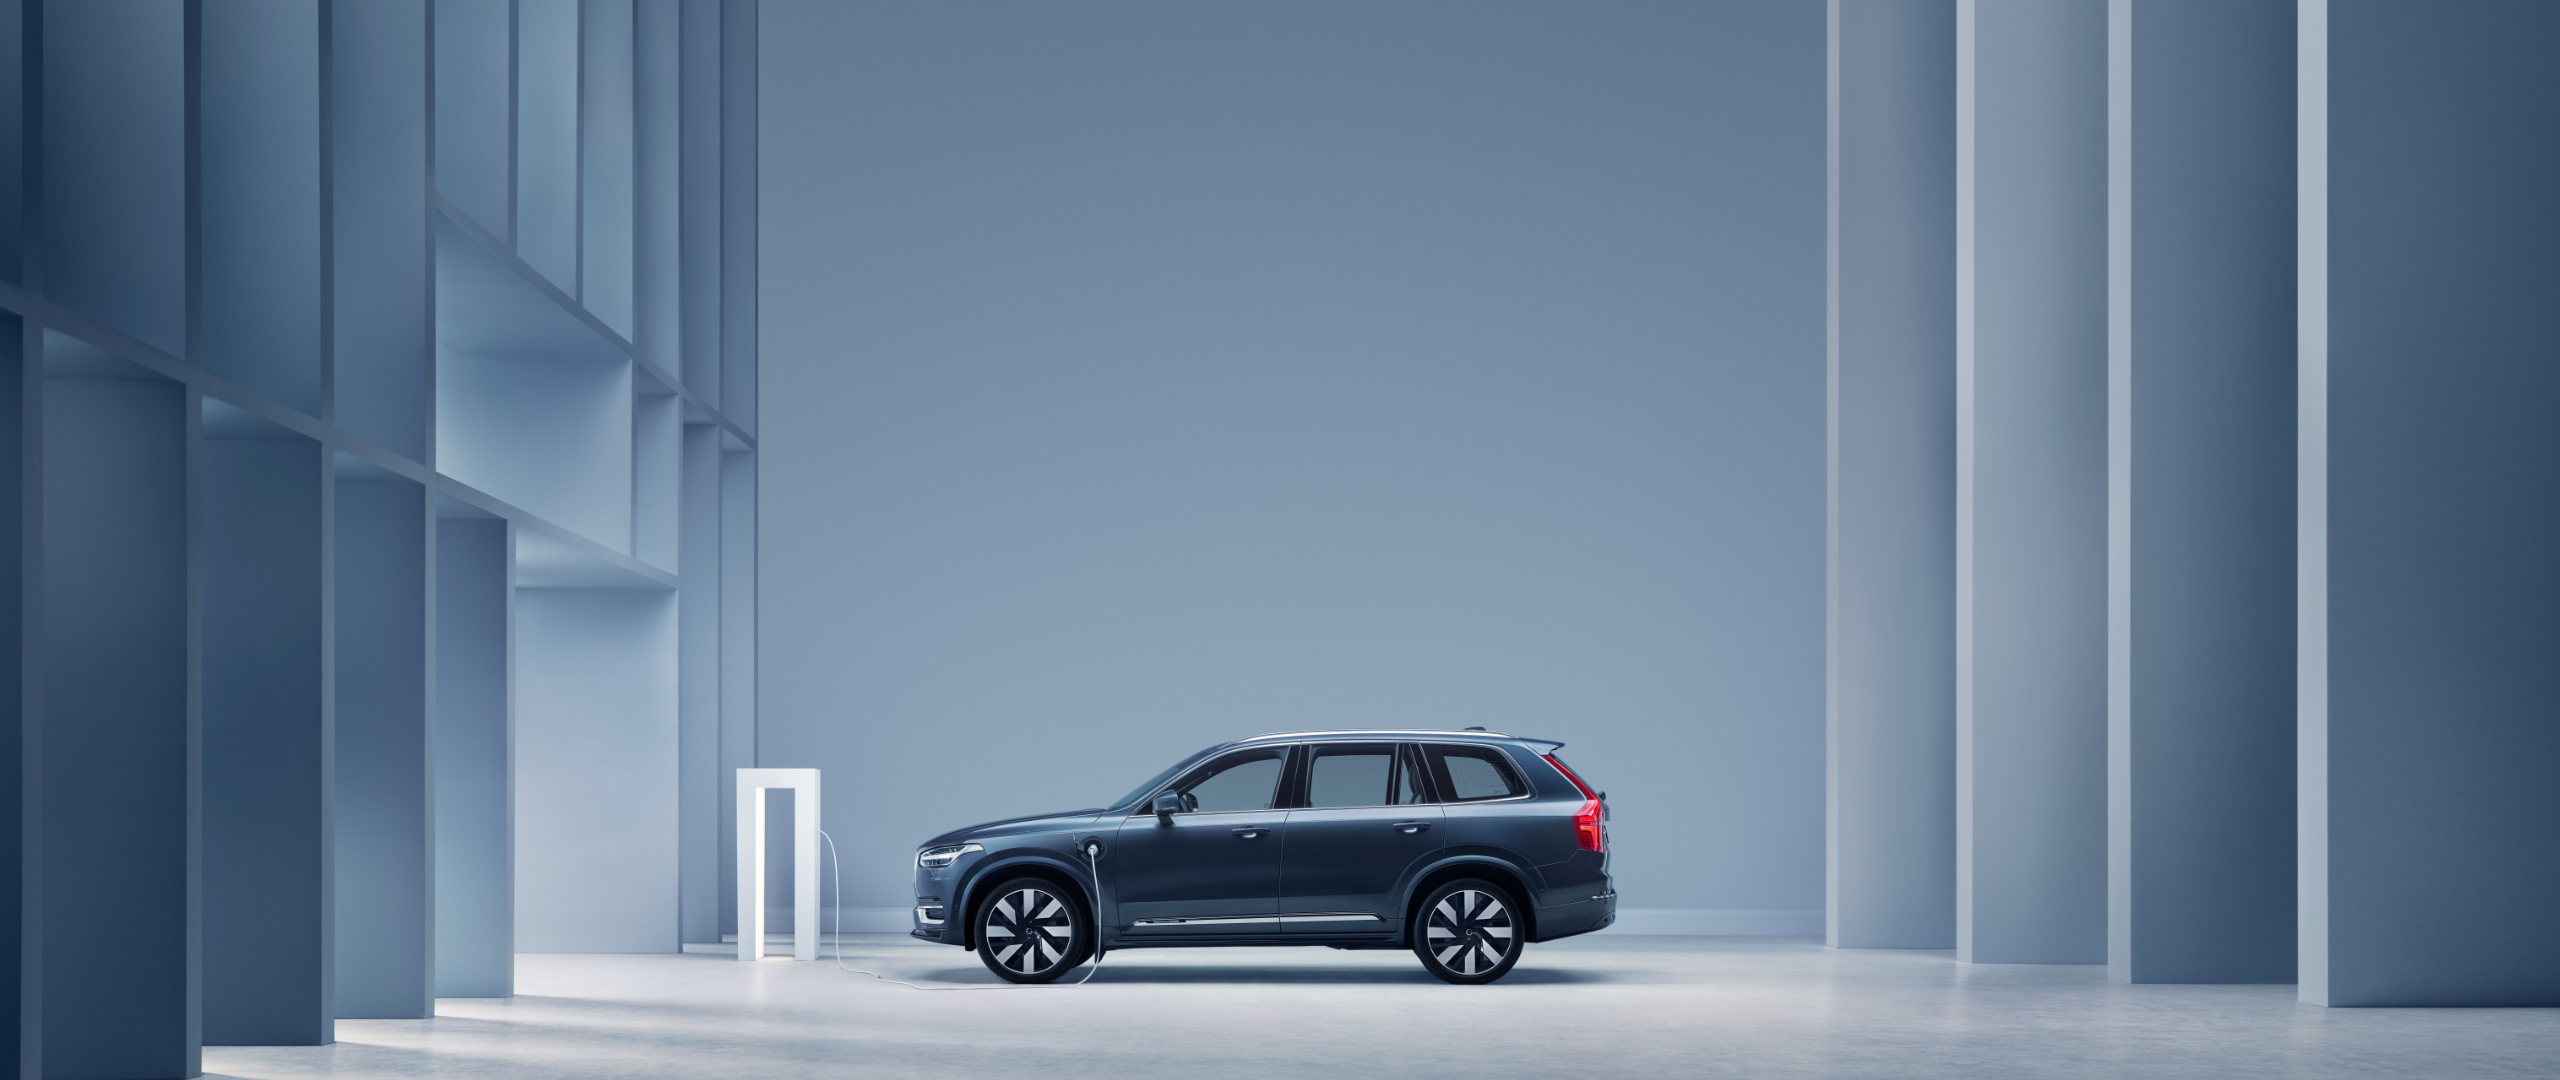 The side profile of a Volvo XC90 PHEV